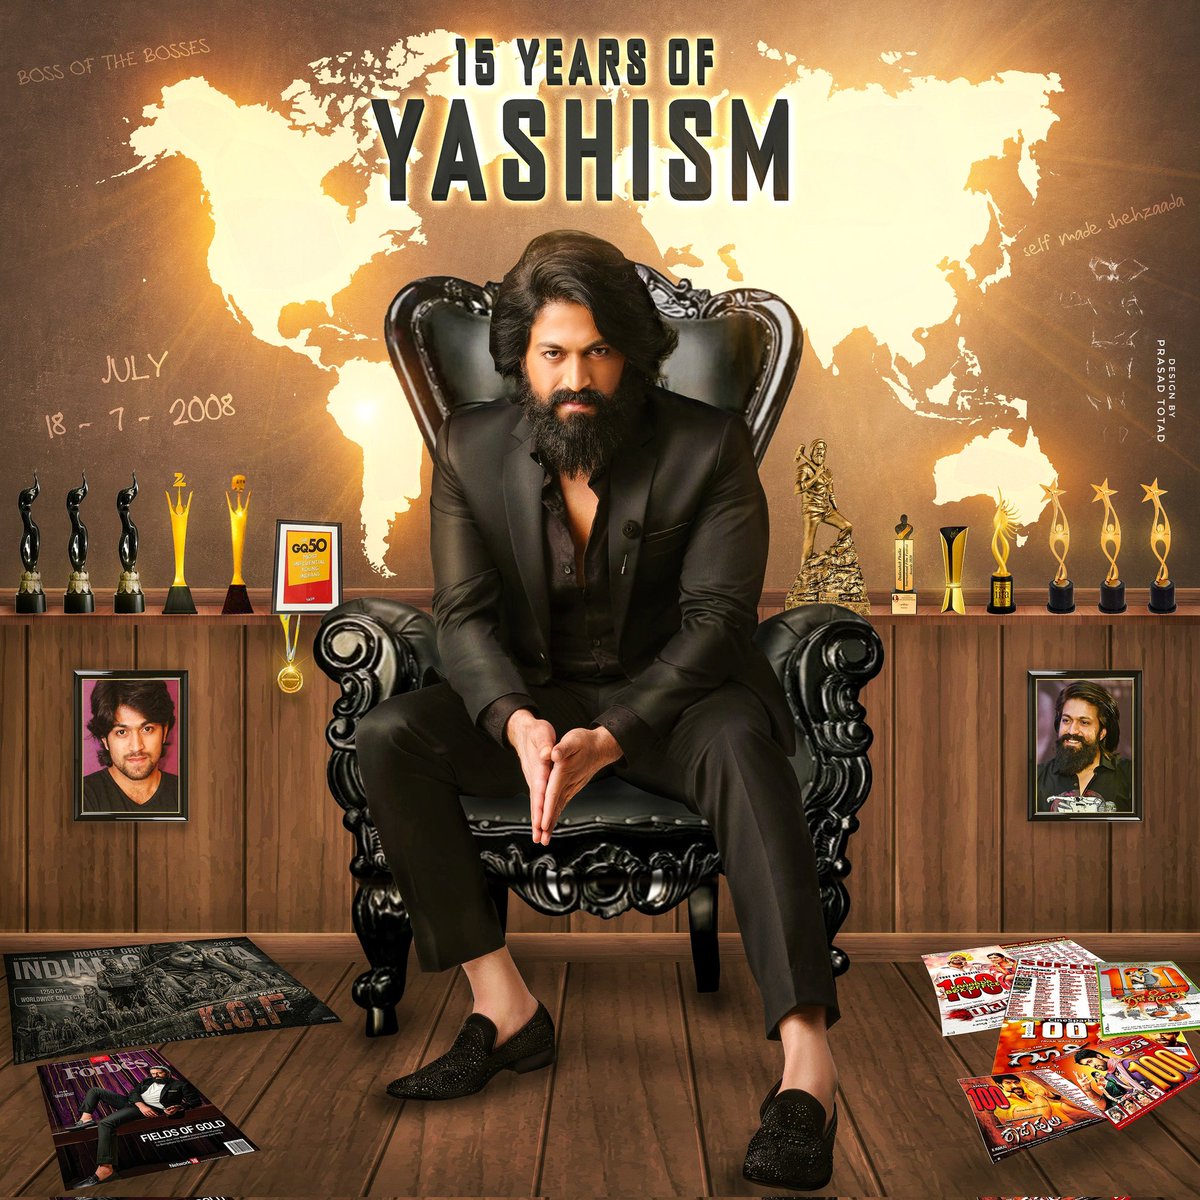 15 Years Back He Came Like A Soldier, Did Lot Of Hard work Served People With that Golden Heart. So People Called Him A King. The @TheNameIsYash BOSS ' 15 Glorious Years Of YASHism ' #YashBoss #Yash19 @TheNameIsYash